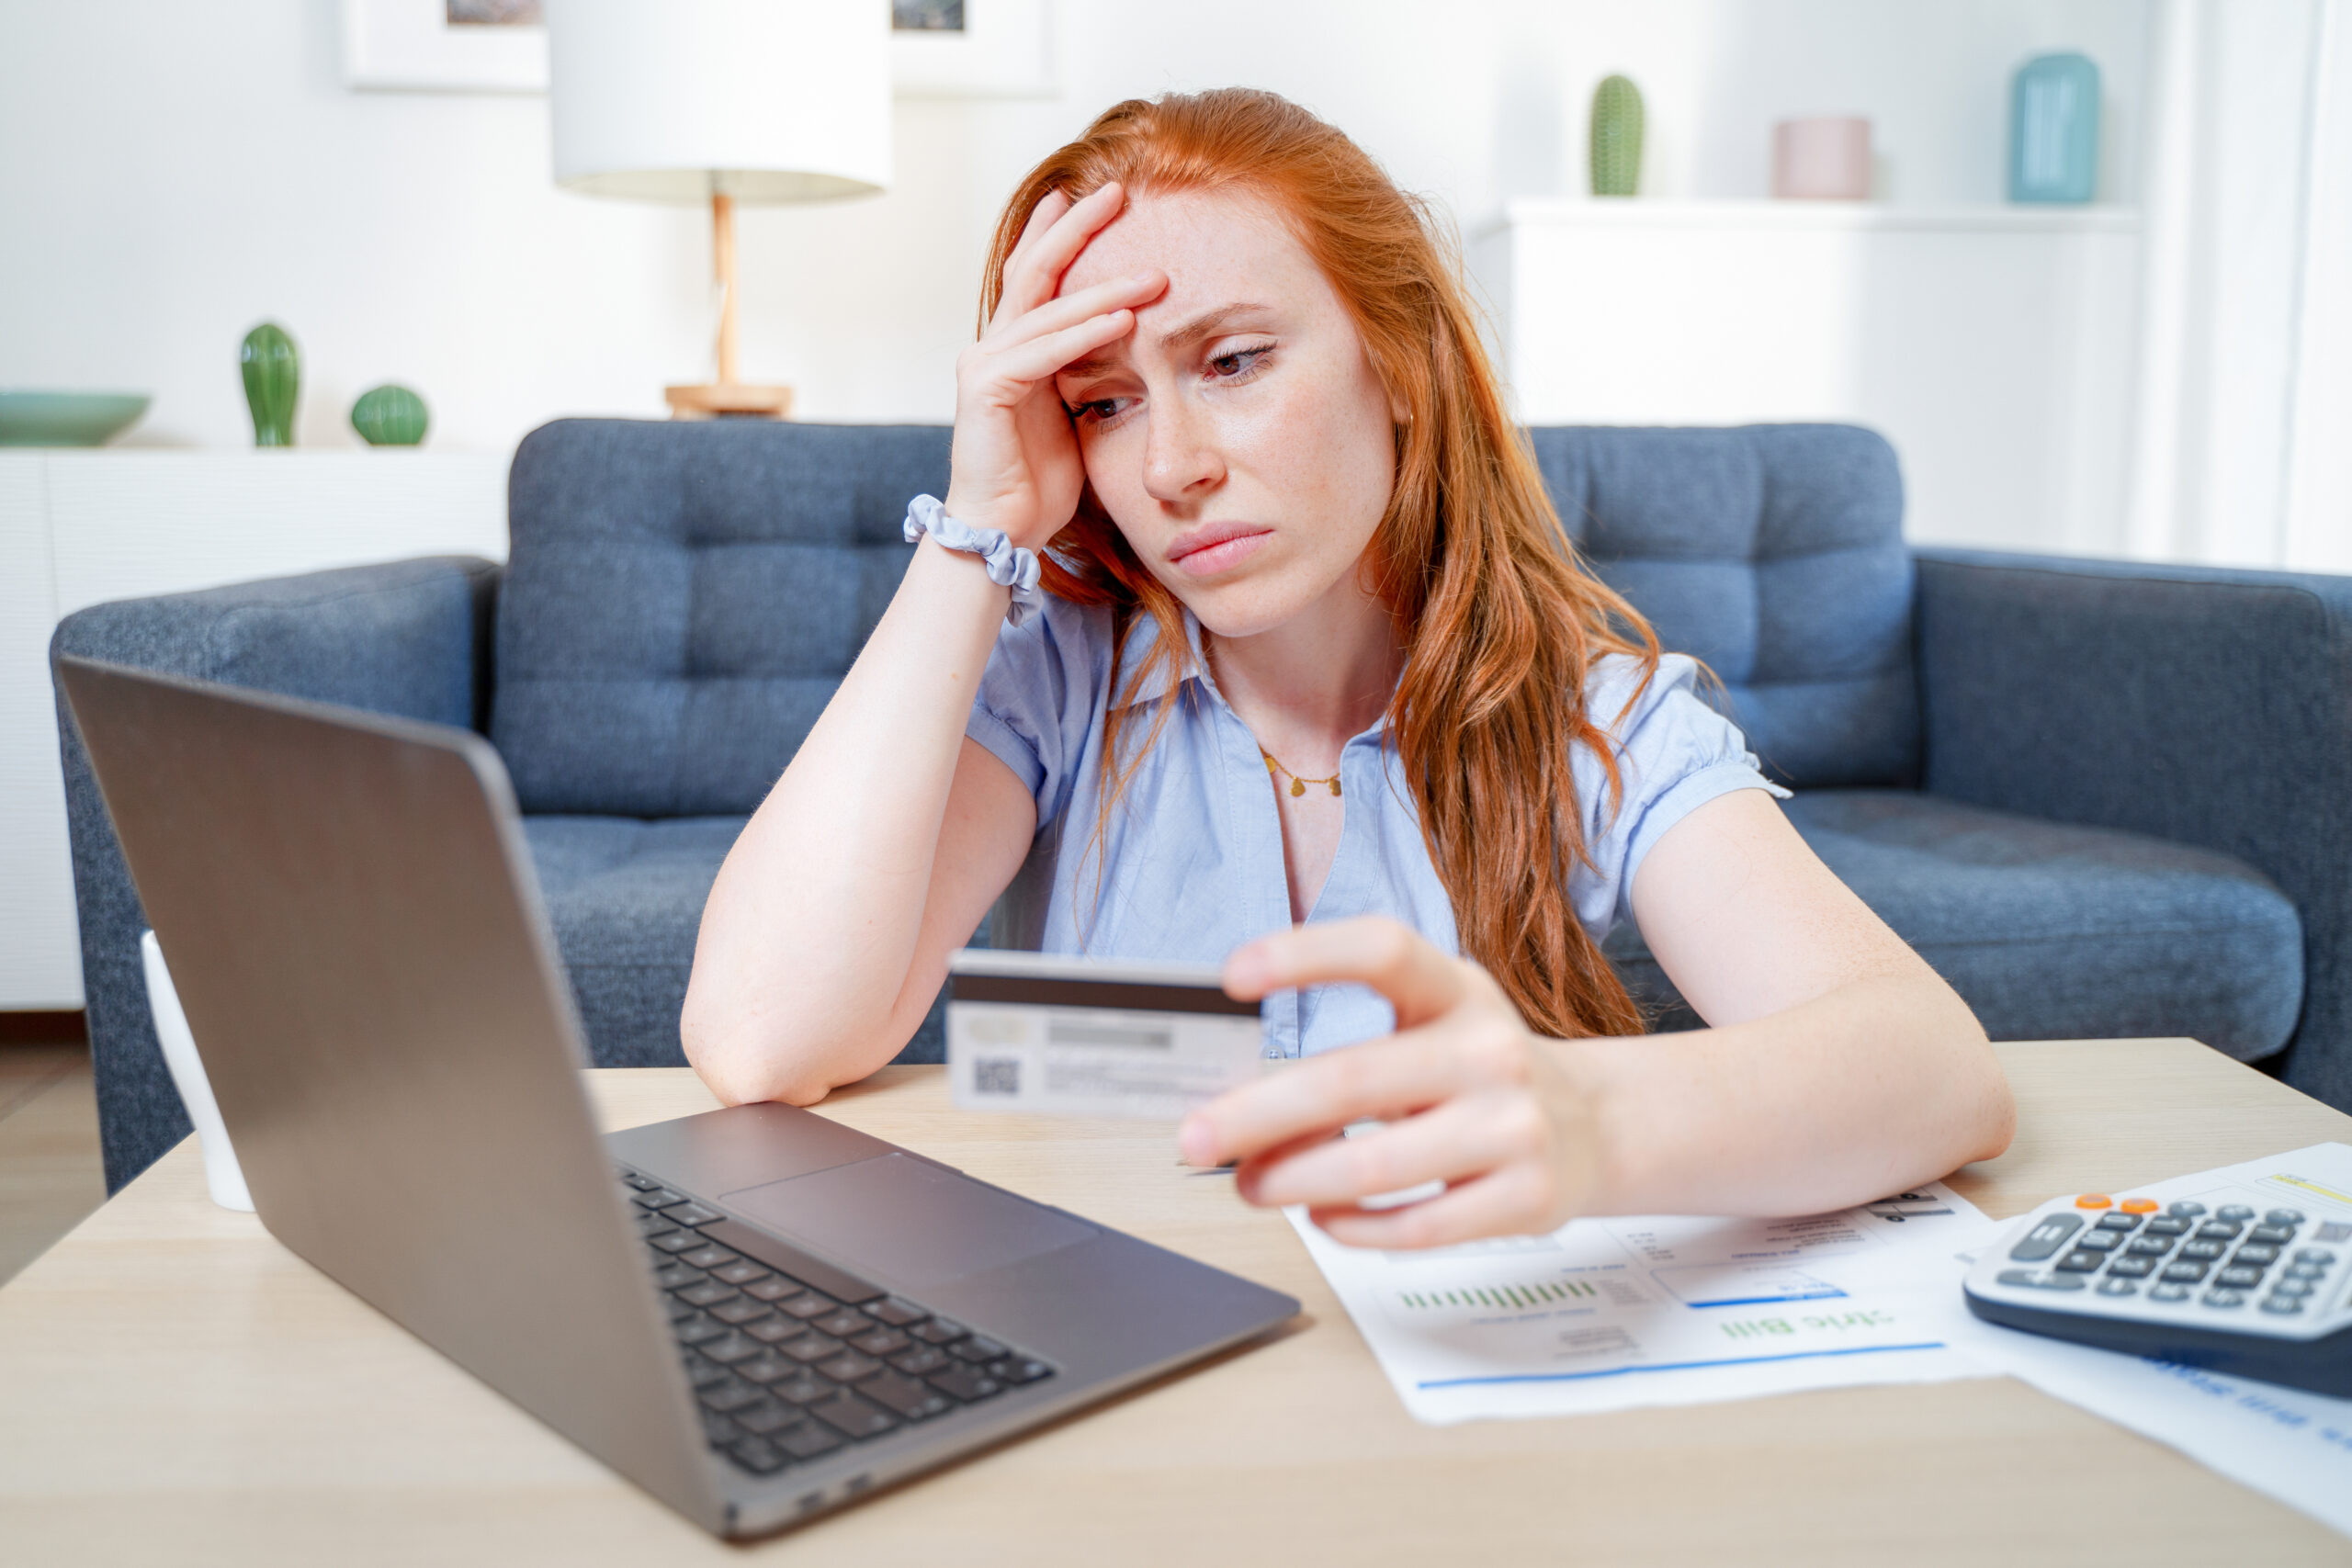 Sad woman checking bank account still in the red